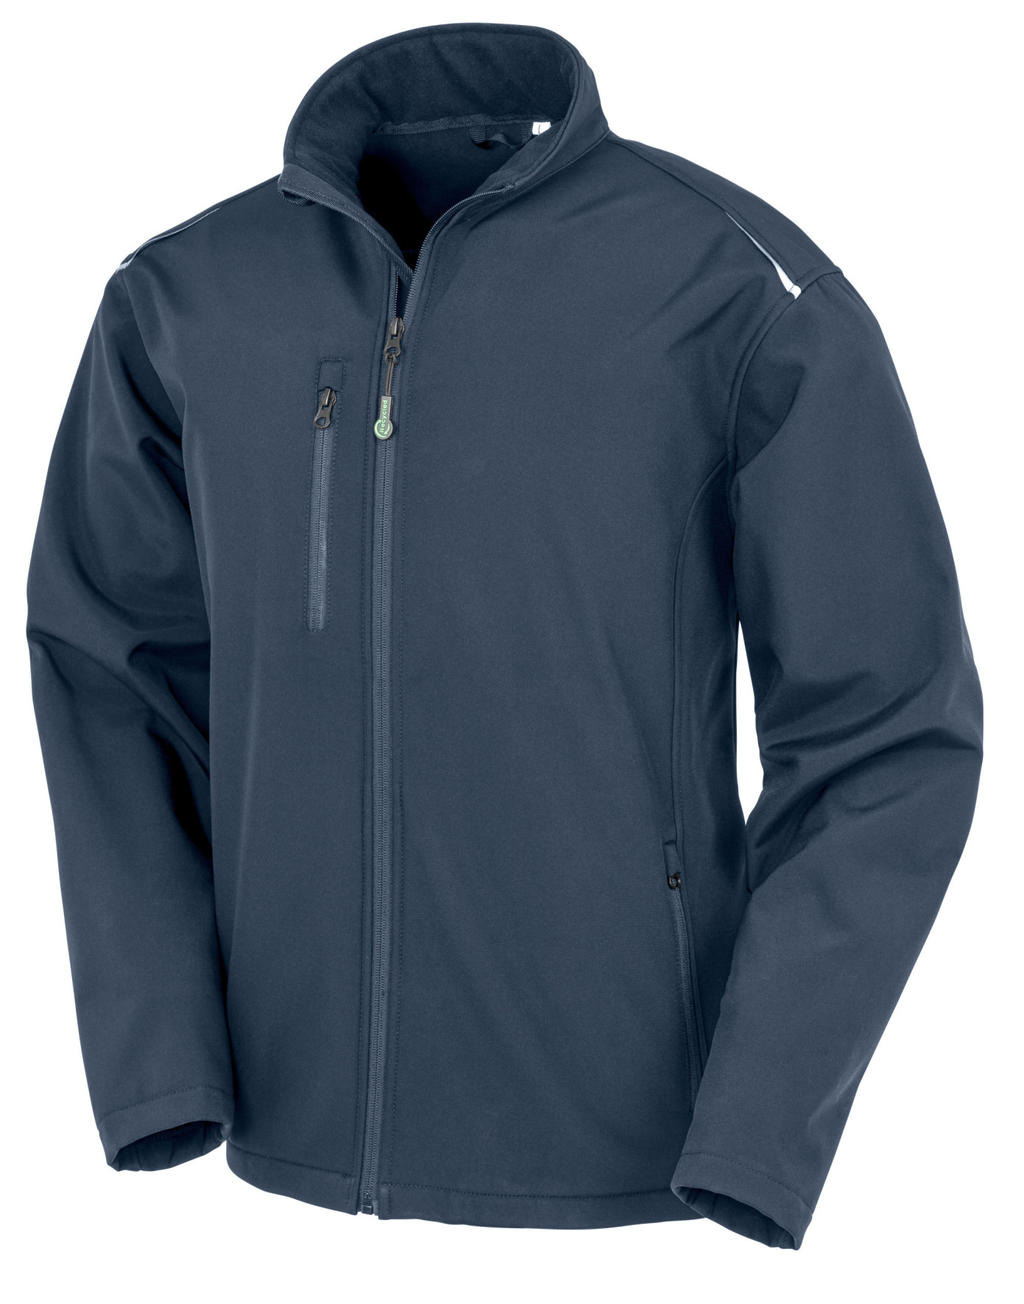  Recycled 3-Layer Printable Softshell Jacket in Farbe Navy